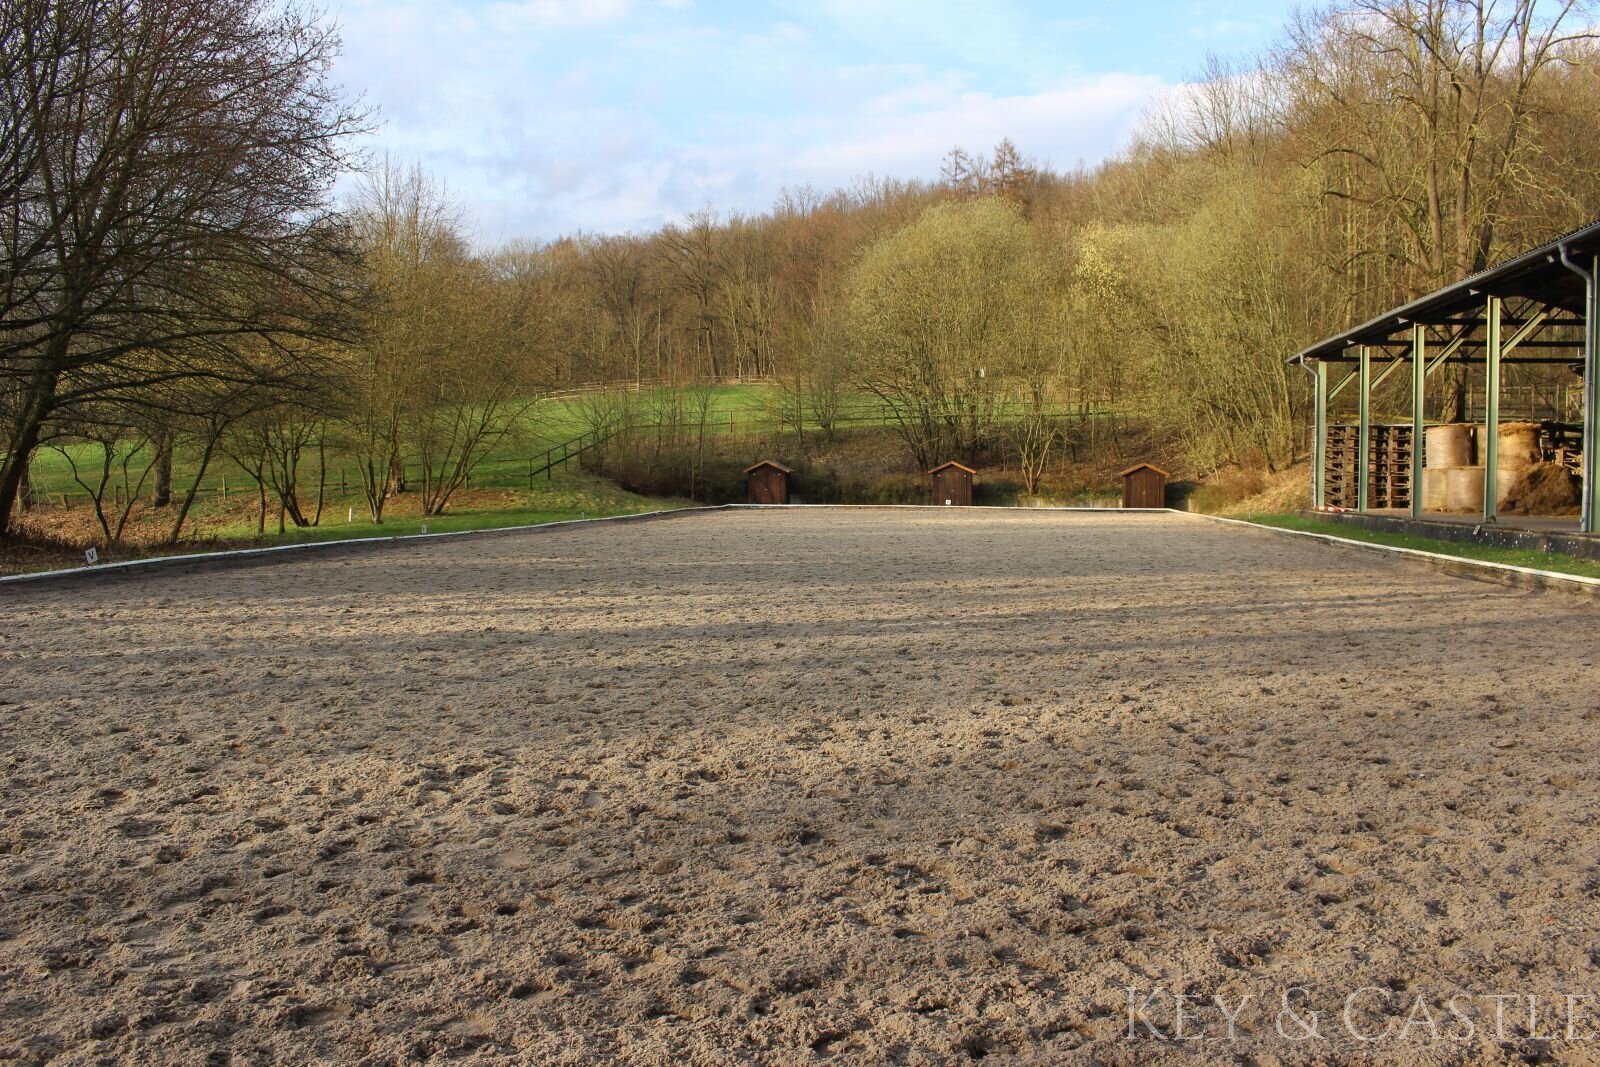 Dressage arena (20x60m) with watering and three judges' huts